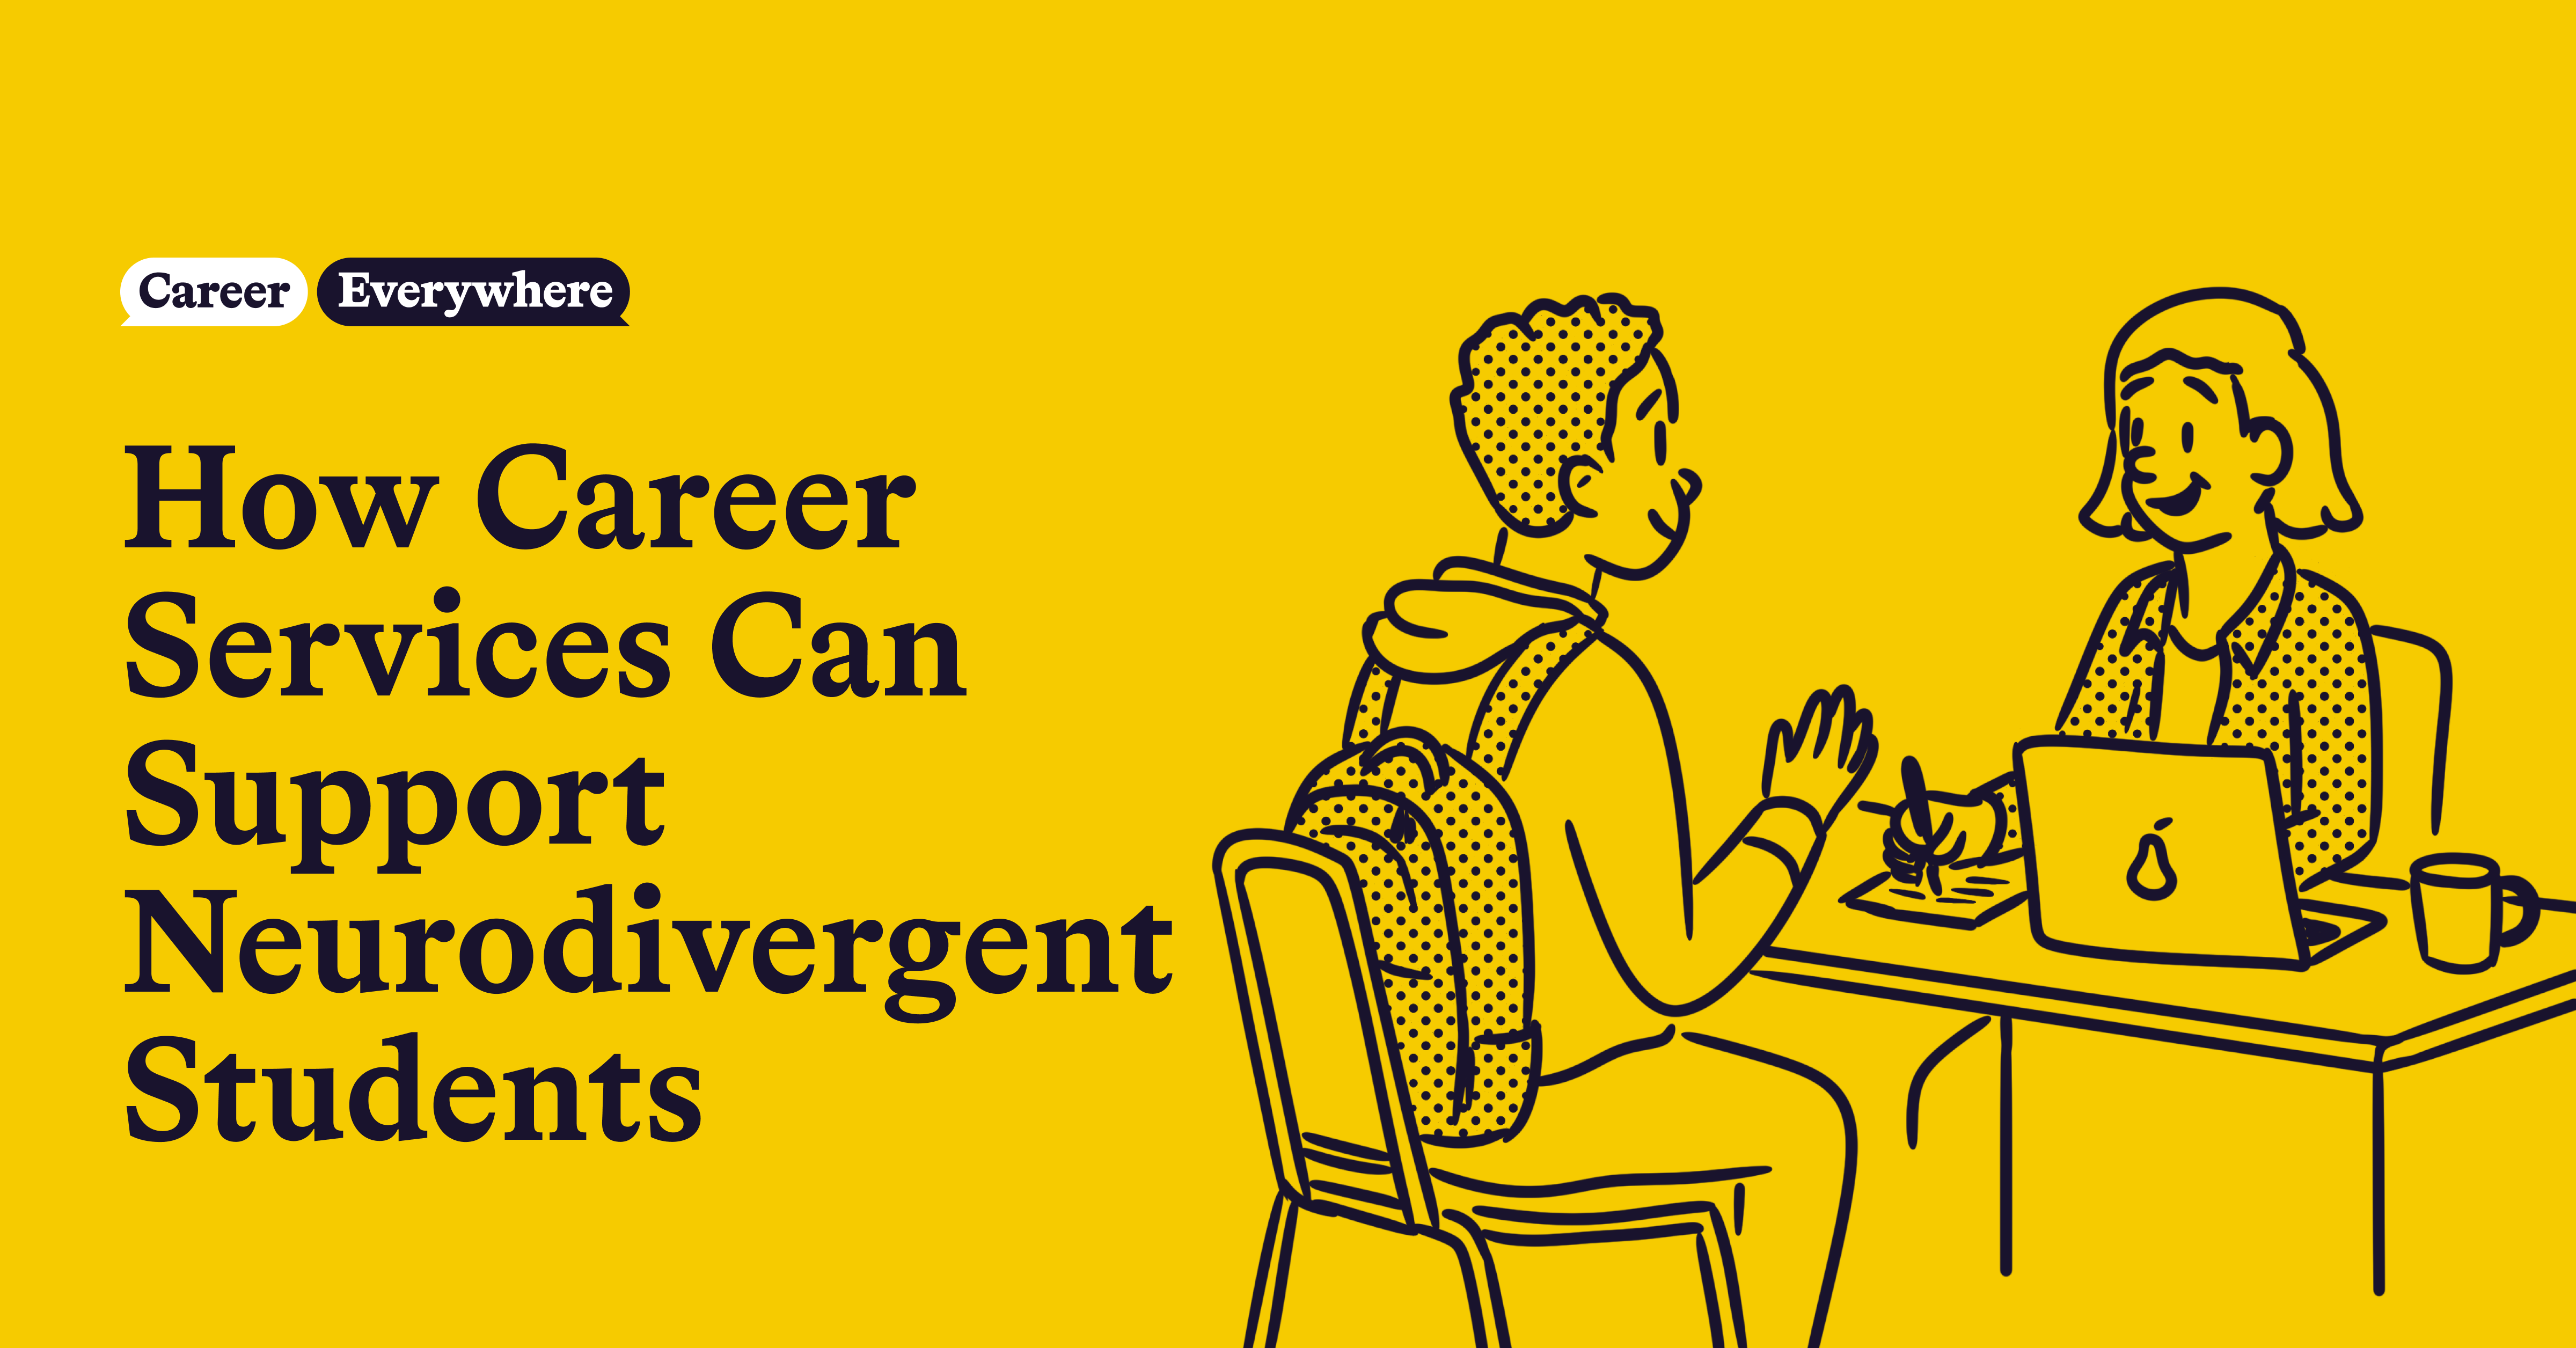 How Career Services Can Support Neurodivergent Students